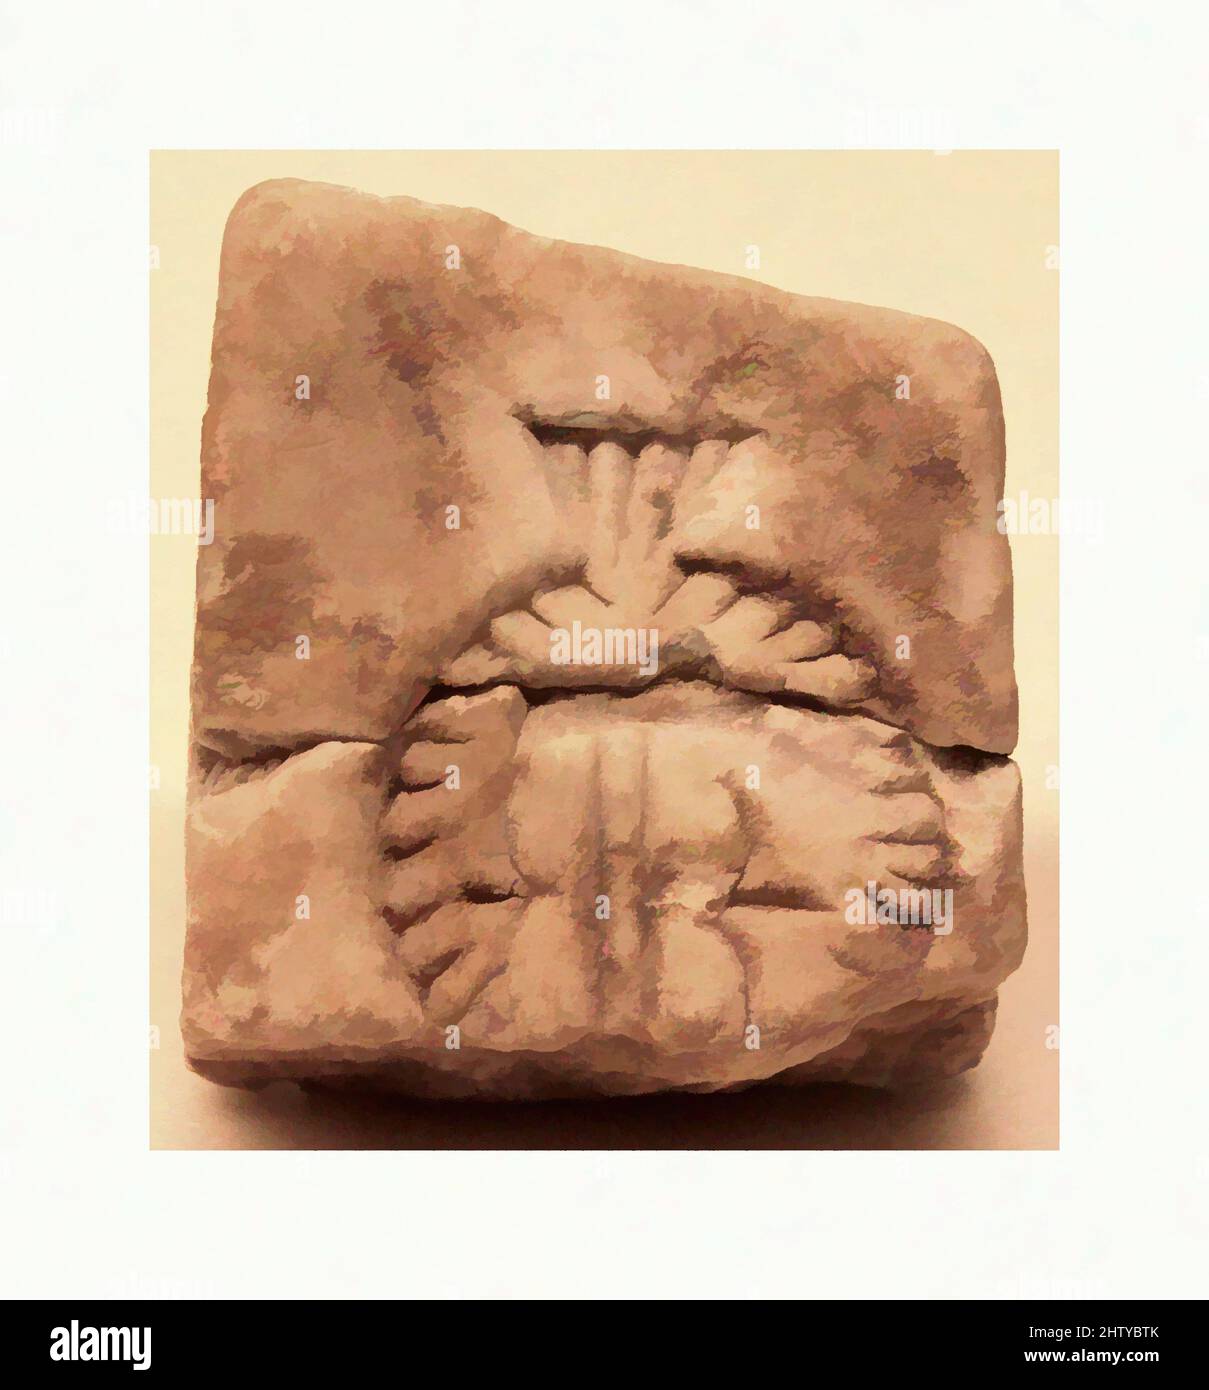 Art inspired by Stone, probably 8th–12th century, Excavated in Iran, Nishapur, Stone, H. 2 1/2 in. (6.4 cm), Stone, Classic works modernized by Artotop with a splash of modernity. Shapes, color and value, eye-catching visual impact on art. Emotions through freedom of artworks in a contemporary way. A timeless message pursuing a wildly creative new direction. Artists turning to the digital medium and creating the Artotop NFT Stock Photo